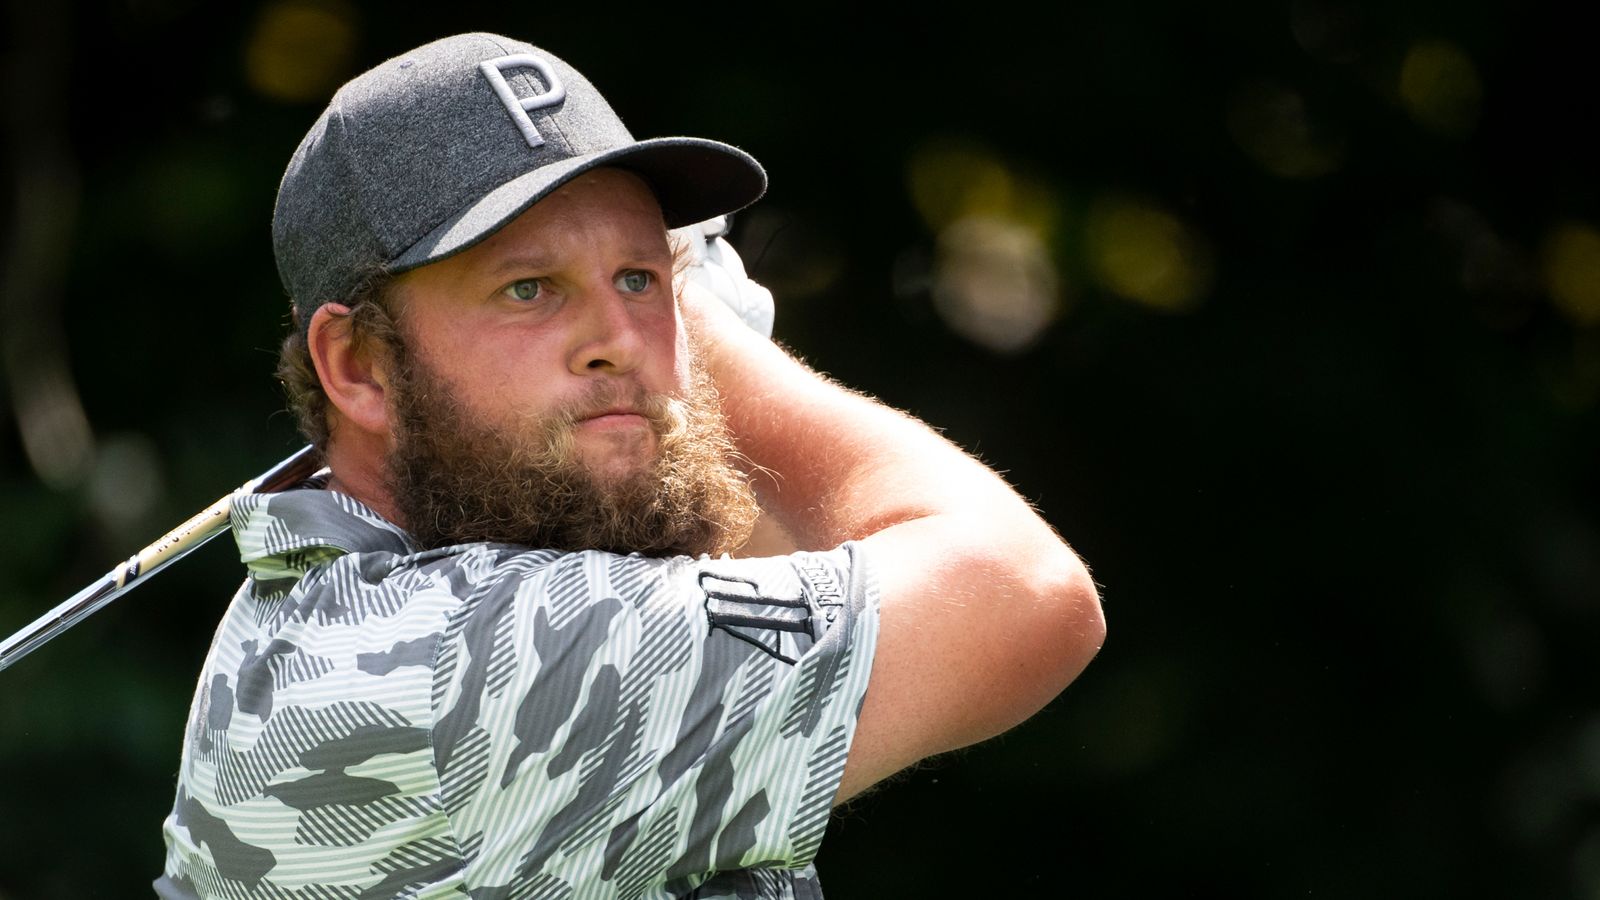 Andrew ‘Beef’ Johnston says he would have to consider offer from LIV Golf, reflects on thumb injury